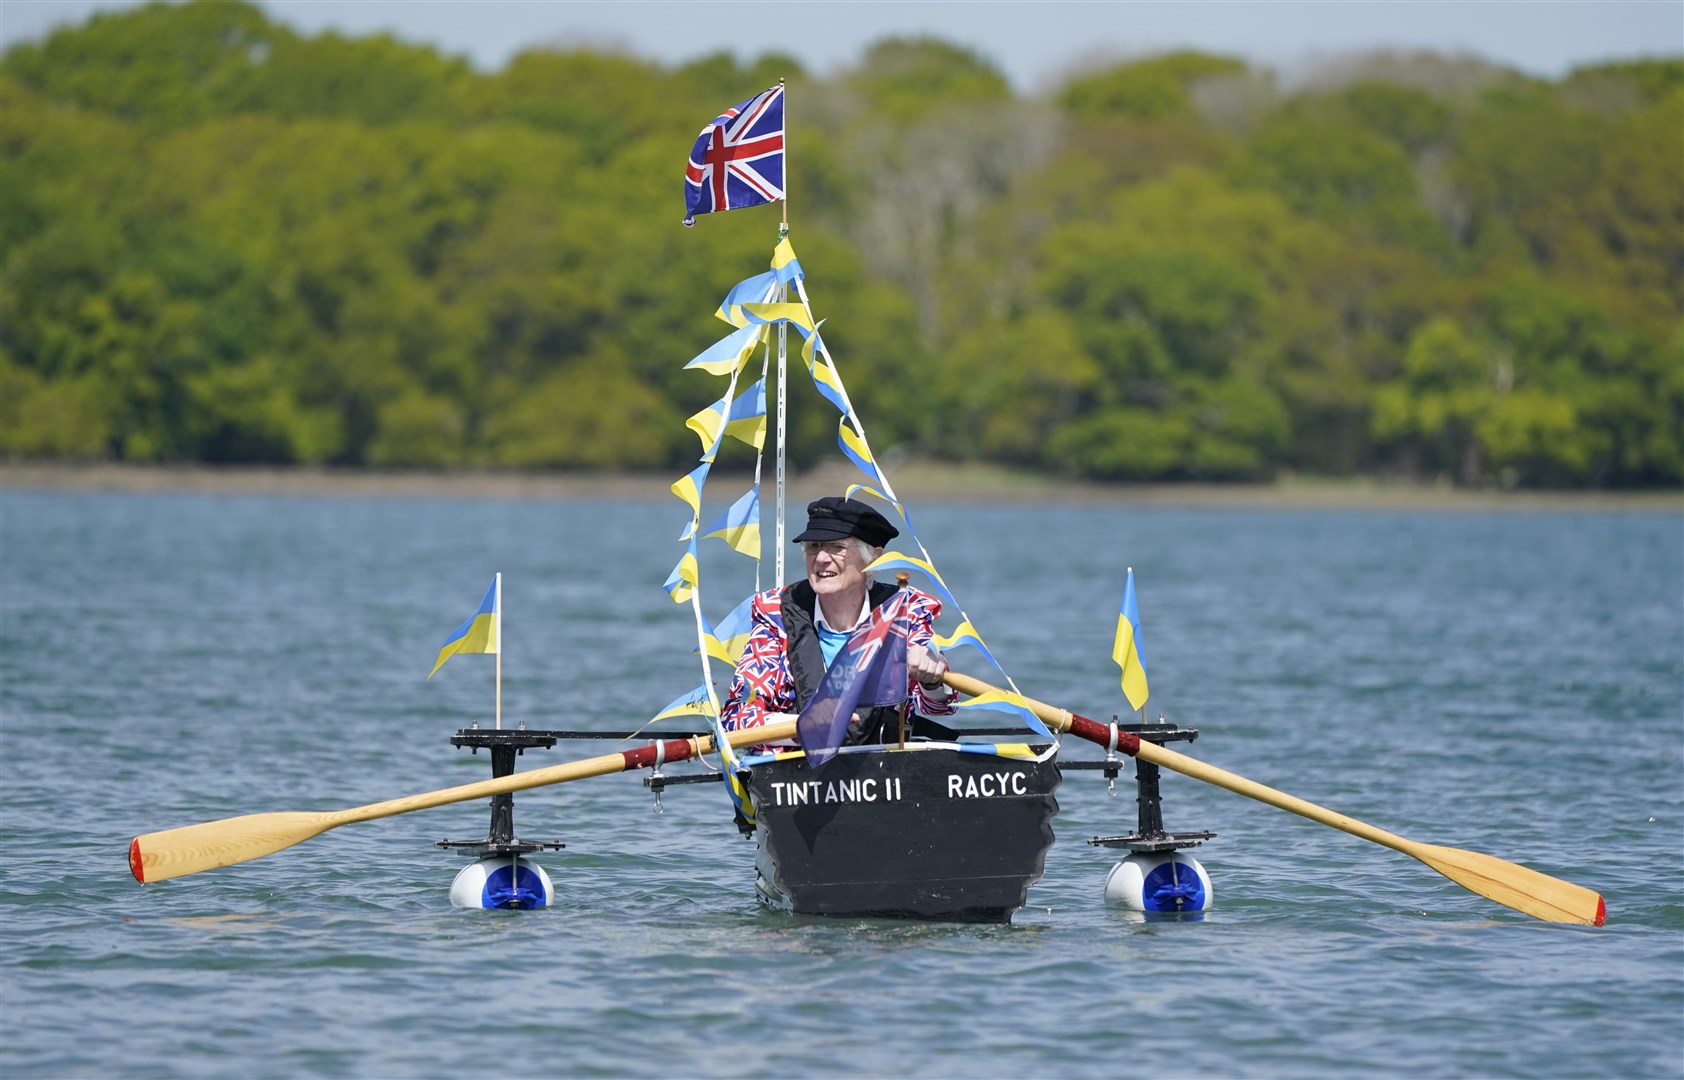 ‘Major Mick’ rows his boat Tintanic II in Chichester harbour as launches his new Tintanic charity challenge (Andrew Matthews/PA)